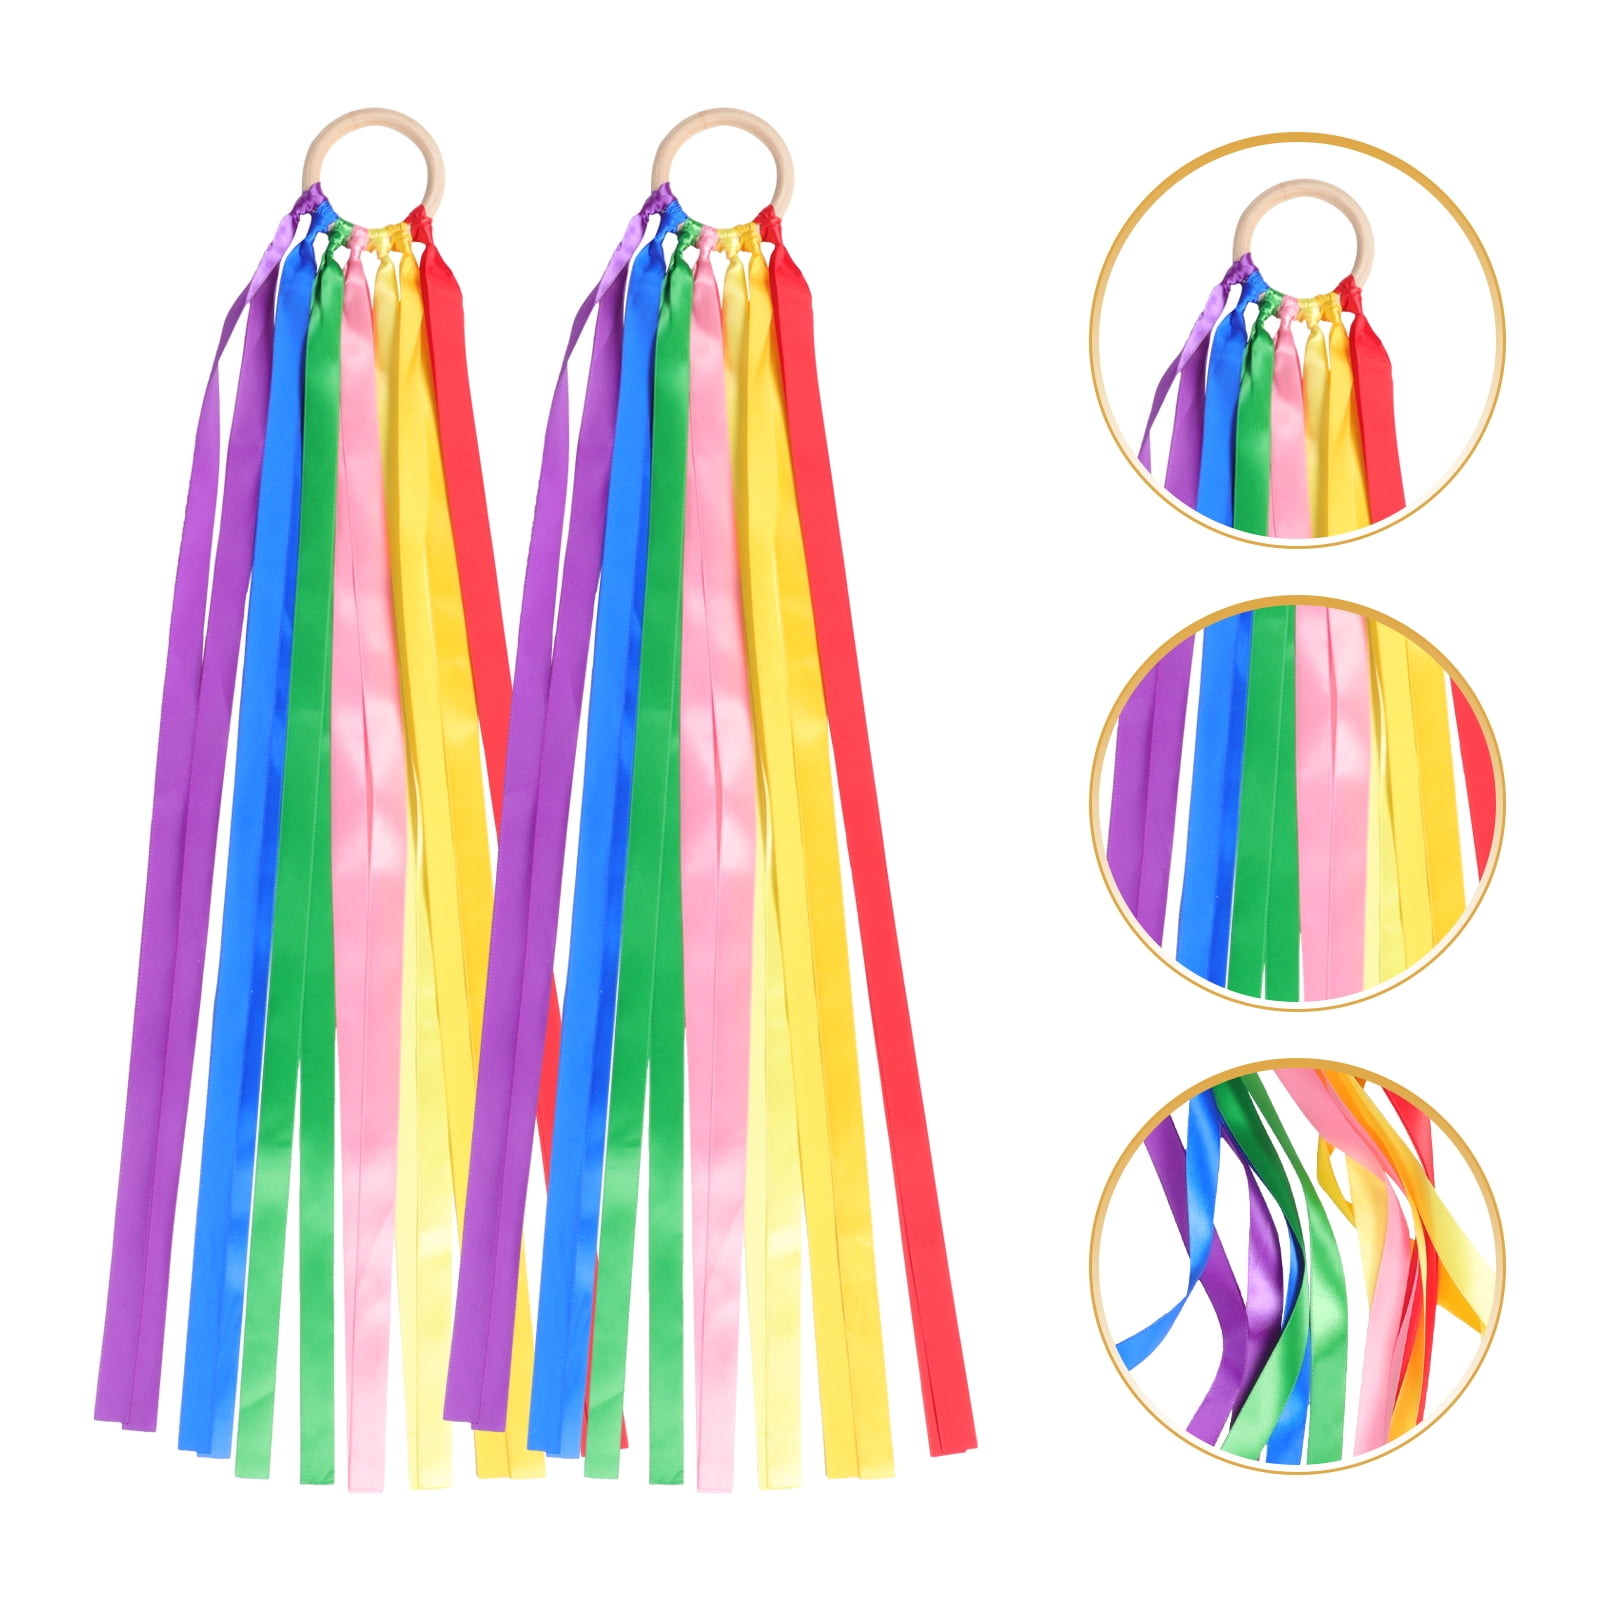  ORZIZRO Rainbow Dance Ribbons, 12PCS Rhythm Ribbon Streamers  for Kids Children Adults - Bright & Multi-Colored : Toys & Games